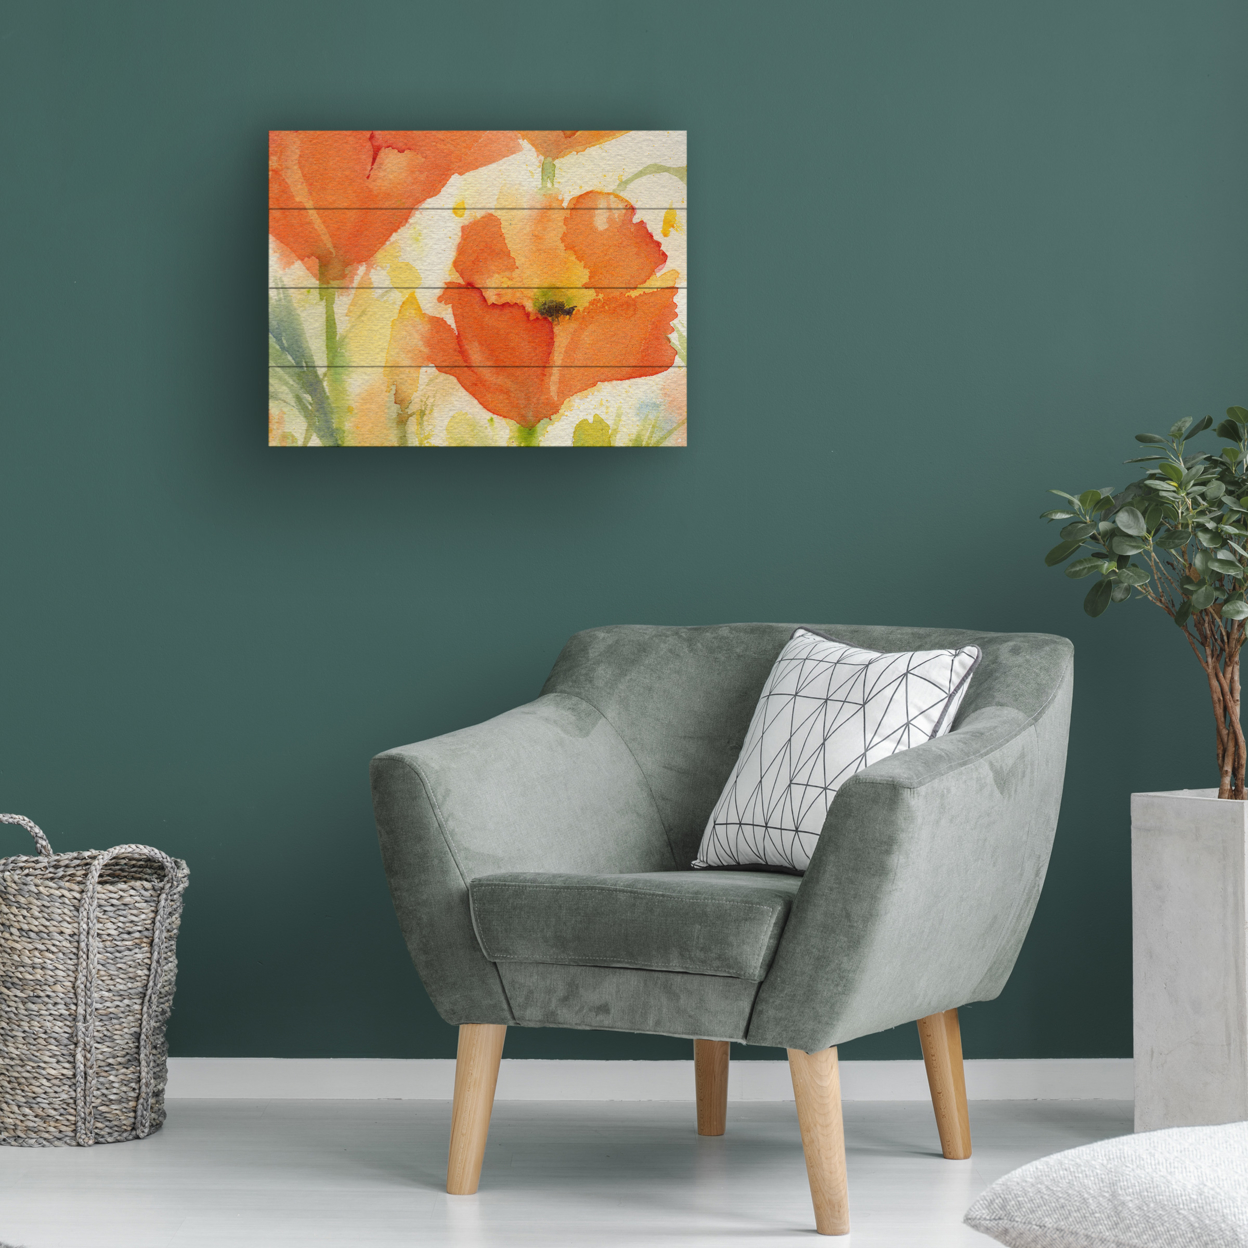 Wall Art 12 X 16 Inches Titled Field Of Poppies Golden Ready To Hang Printed On Wooden Planks